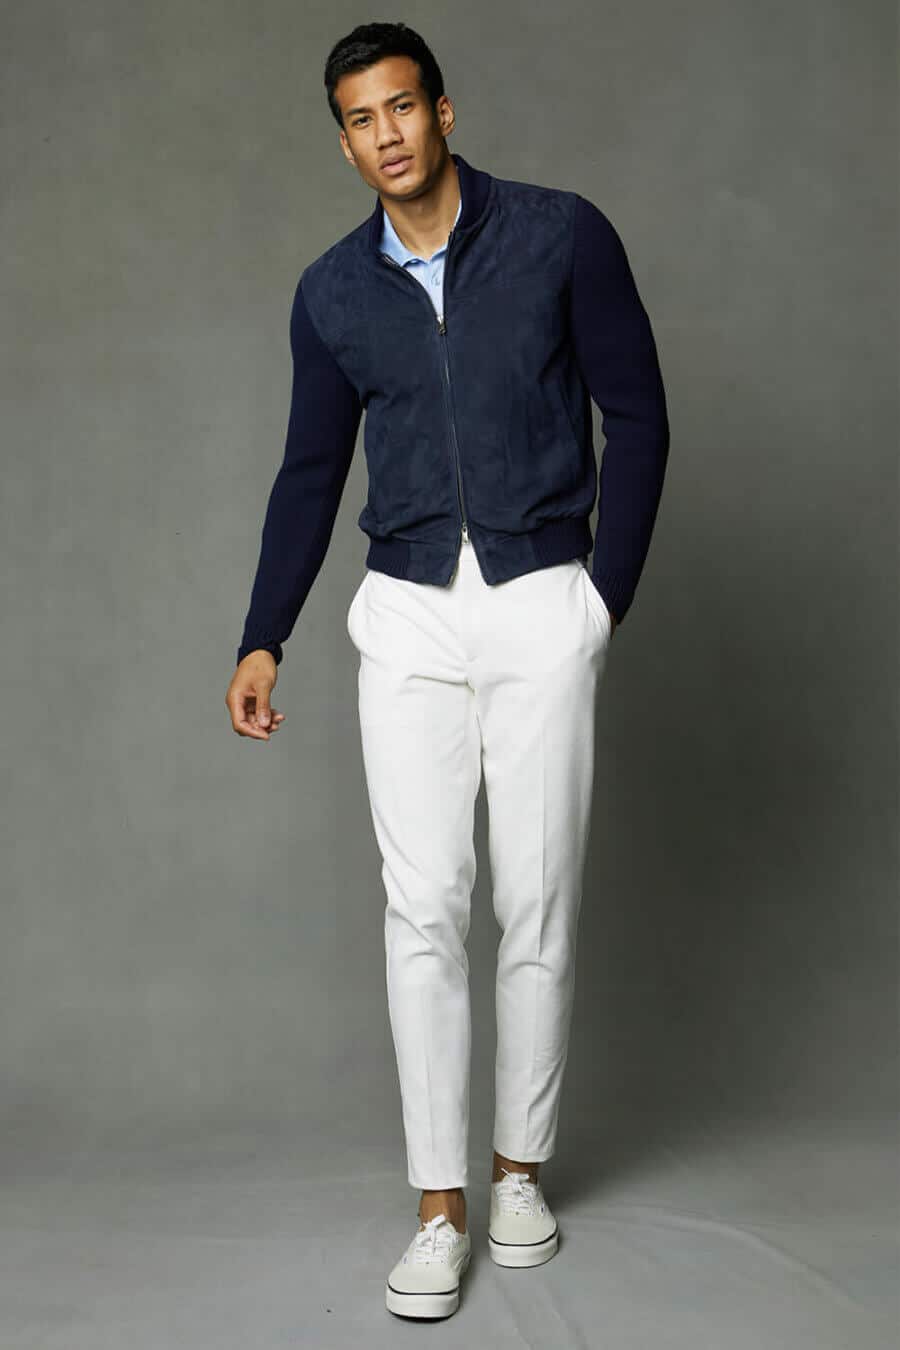 Men's spring outfit - white jeans, blue shirt, suede blue bomber jacket